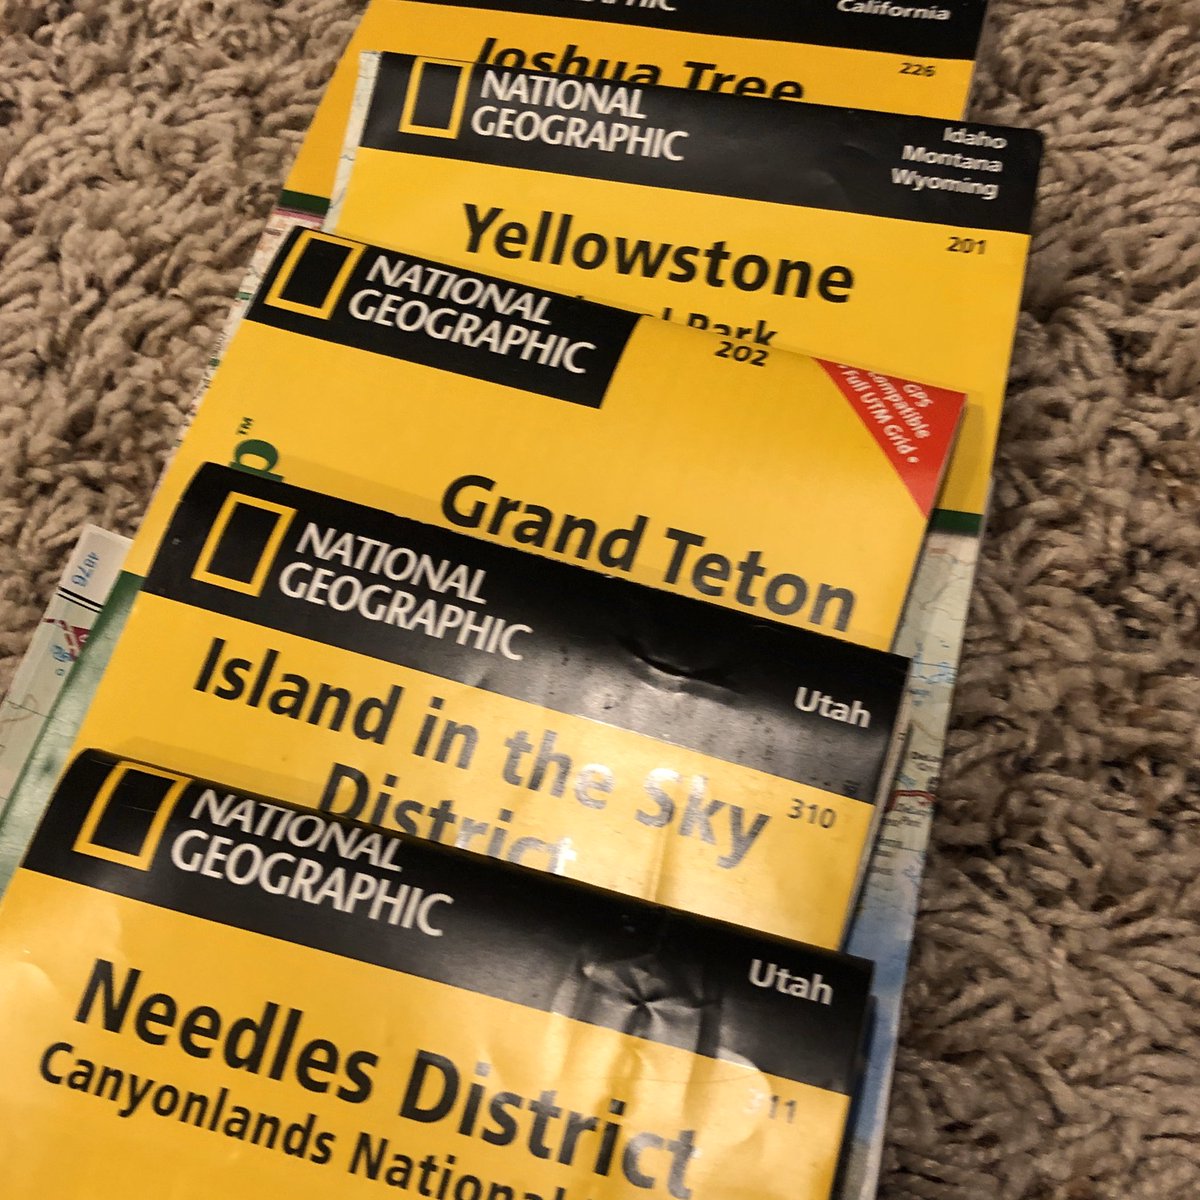 I’ve used these at least once in the field. If you asked me a couple of months ago, I would have assured you that I was using the Needles map.